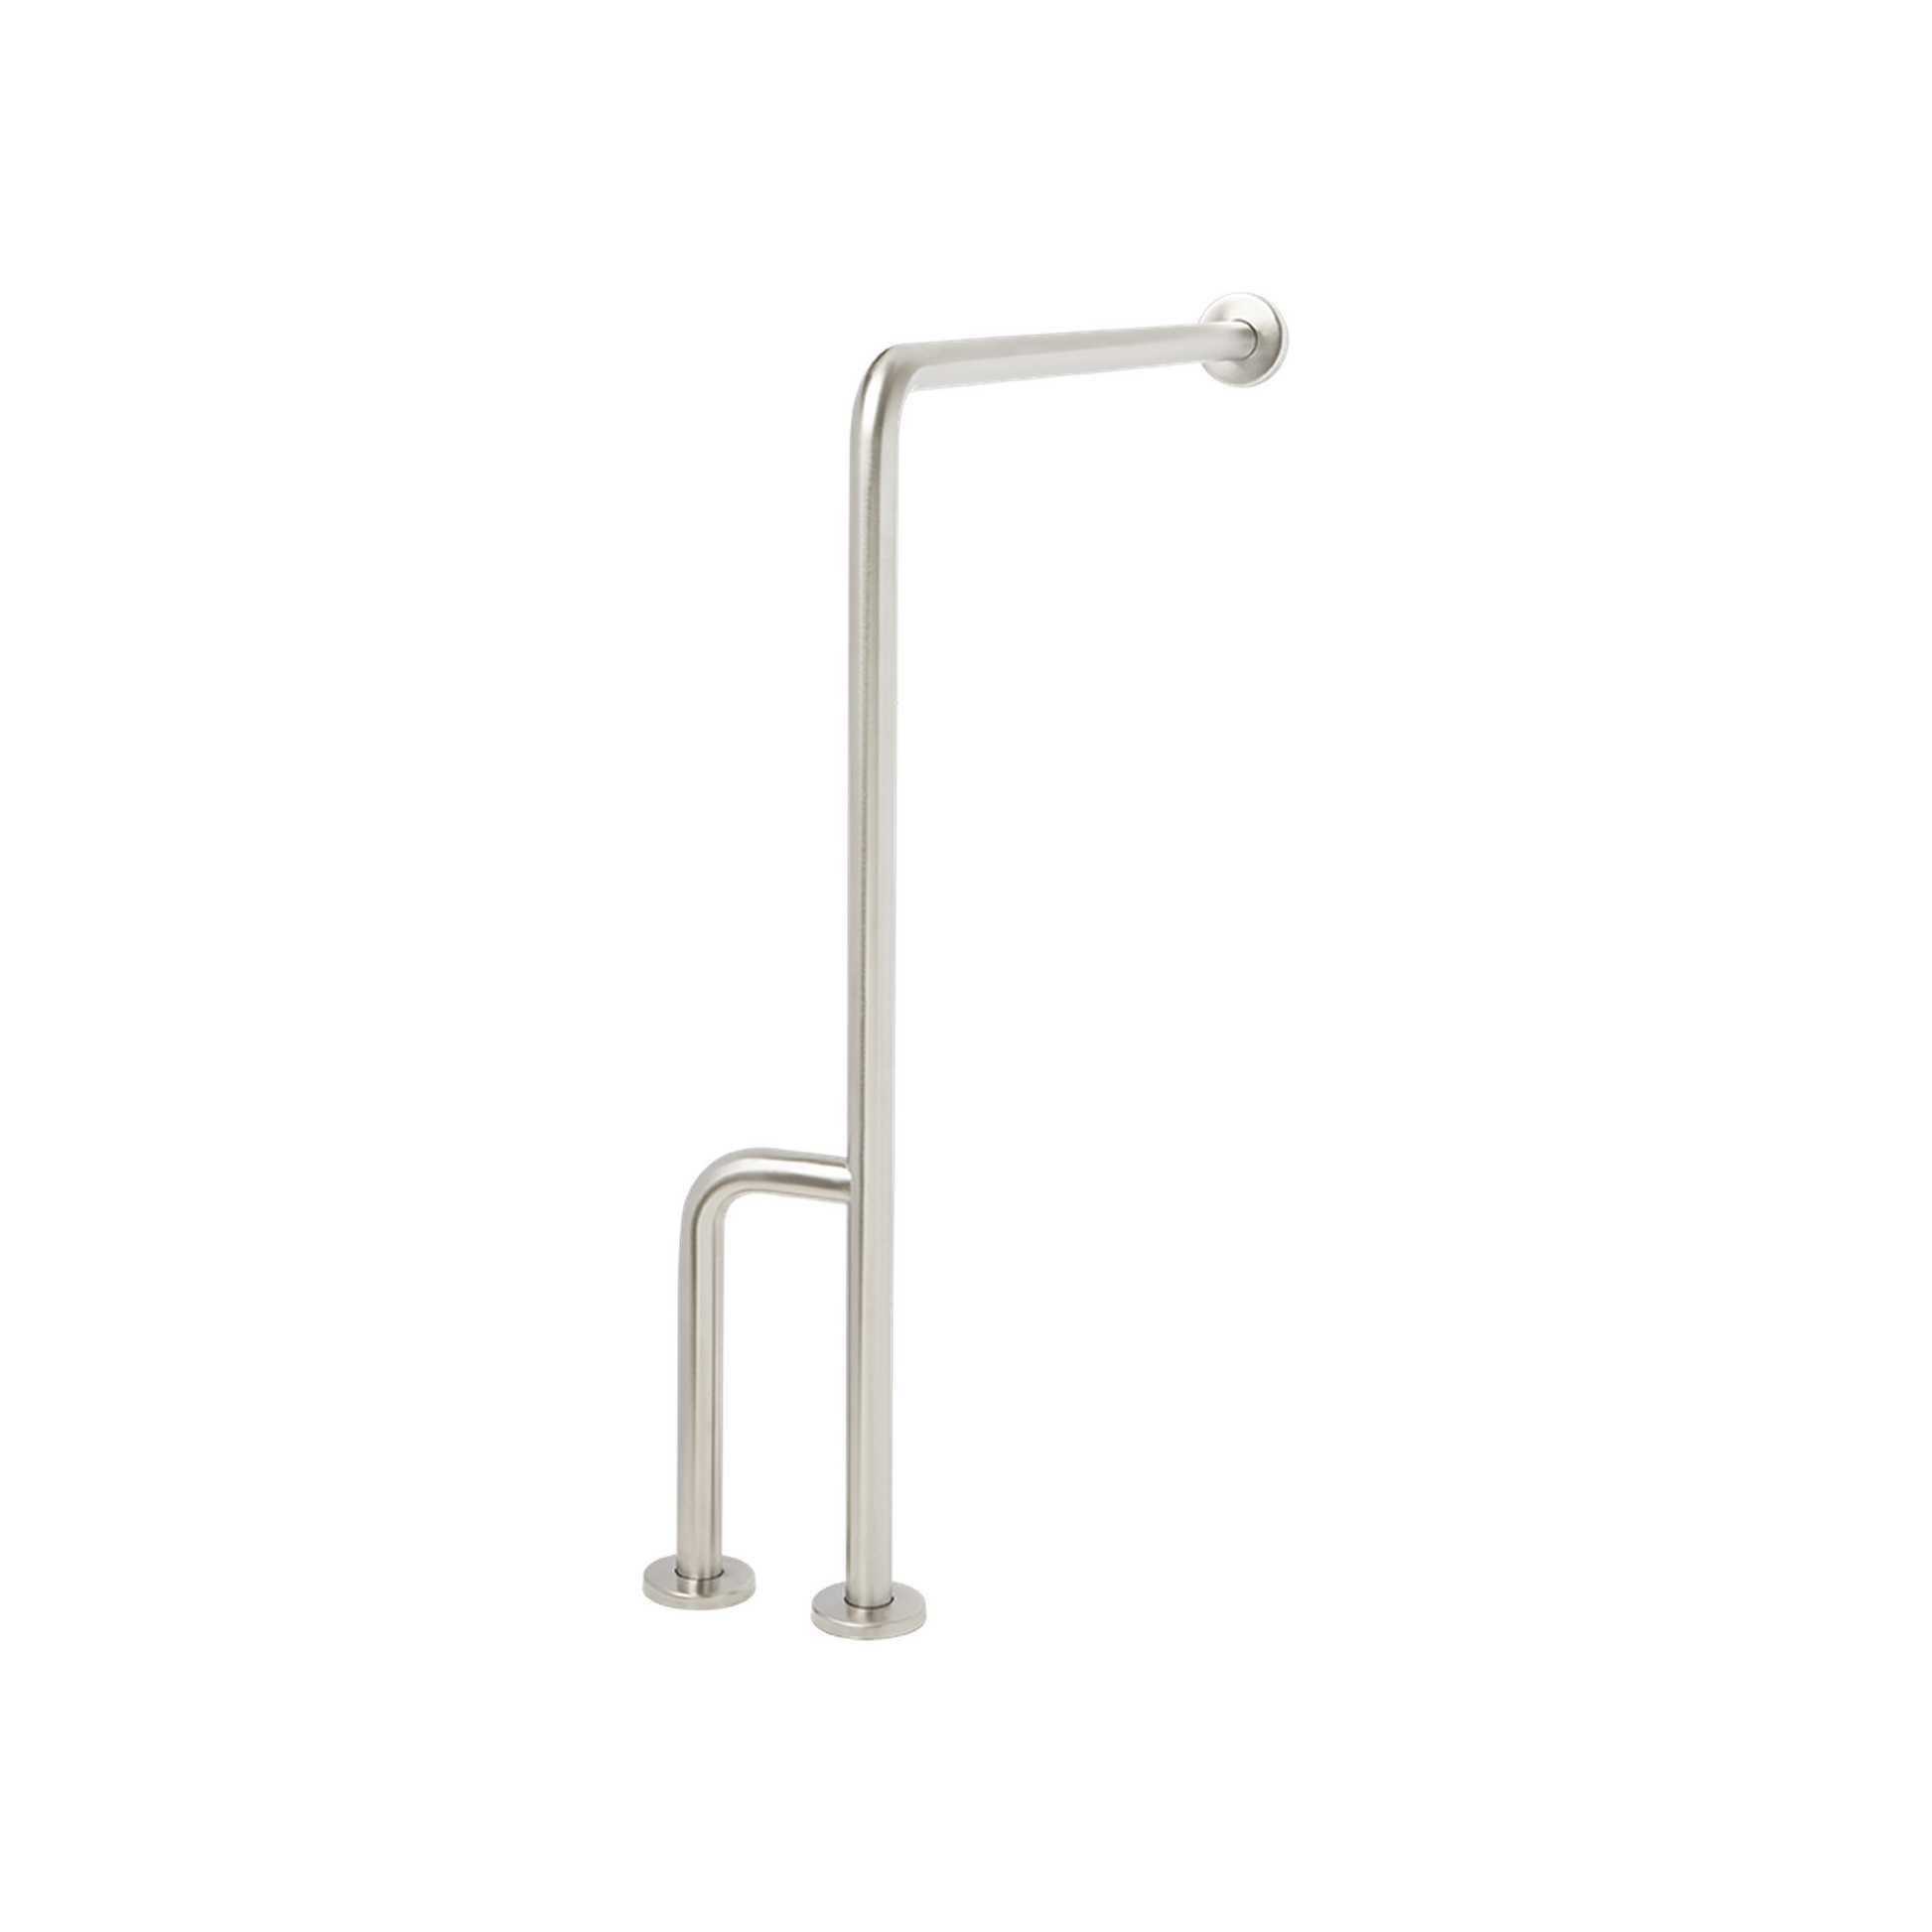 Seachrome Signature Series 33" H x 30" D Satin Stainless Steel 1.5" Bar Diameter Concealed Flange Left-Handed Configuration Wall-To-Floor Grab Bar With Side Leg